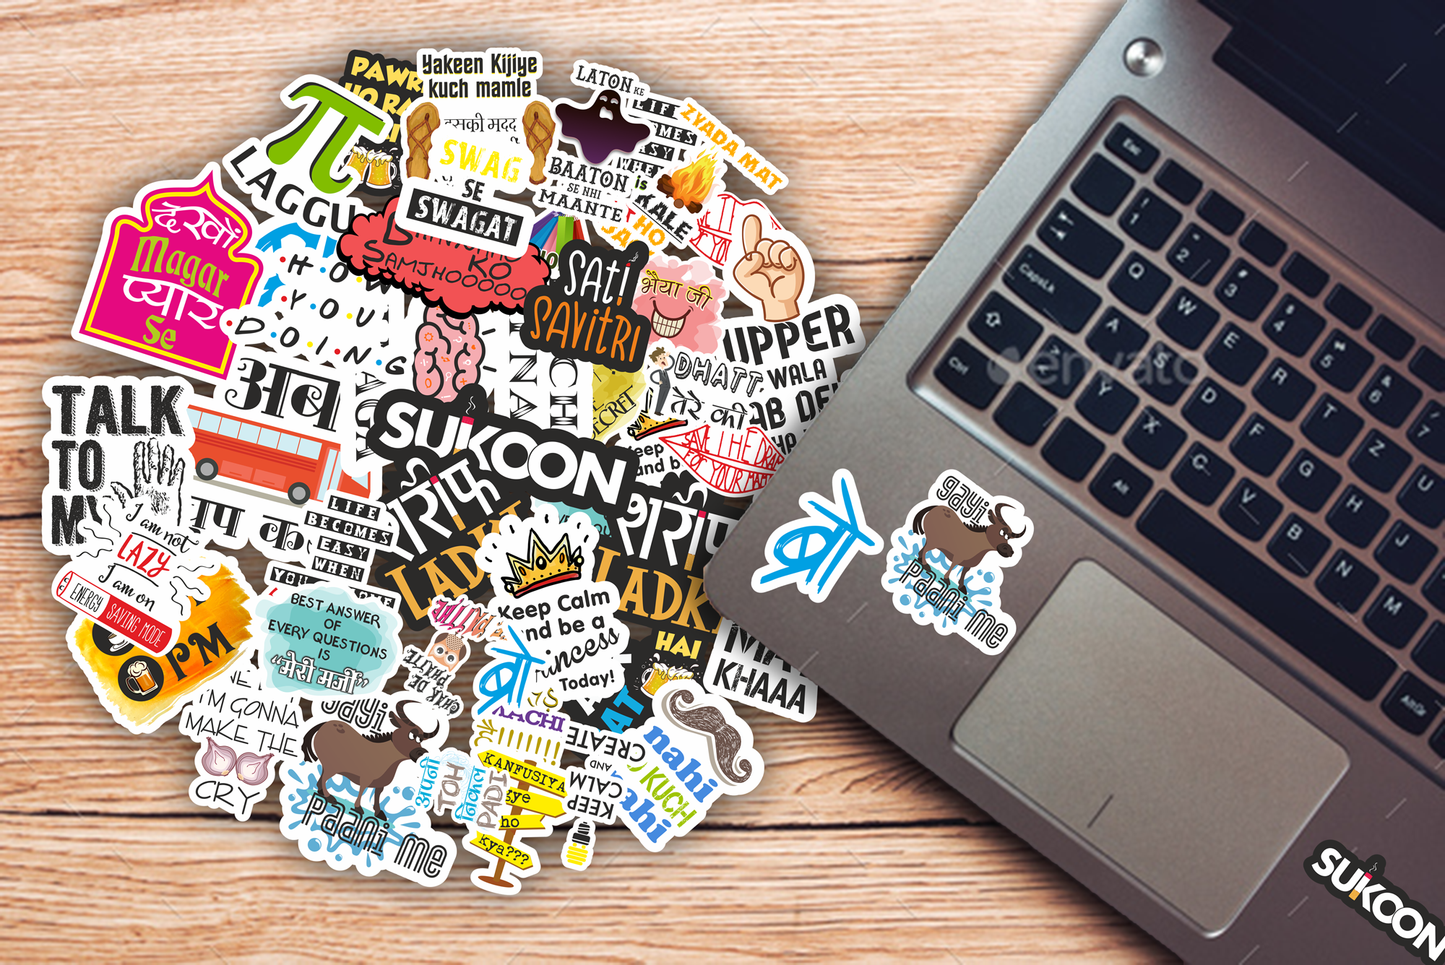 iberry's 38 pcs Stickers for Laptop Mobile Phones Computer Bicycle Luggage Scrapbooks Gadgets Waterproof Stickers|Funny Quirky Sticker|Funny Quotes Stickers|Laptop Sticker-Set of 38 Stickers (07)